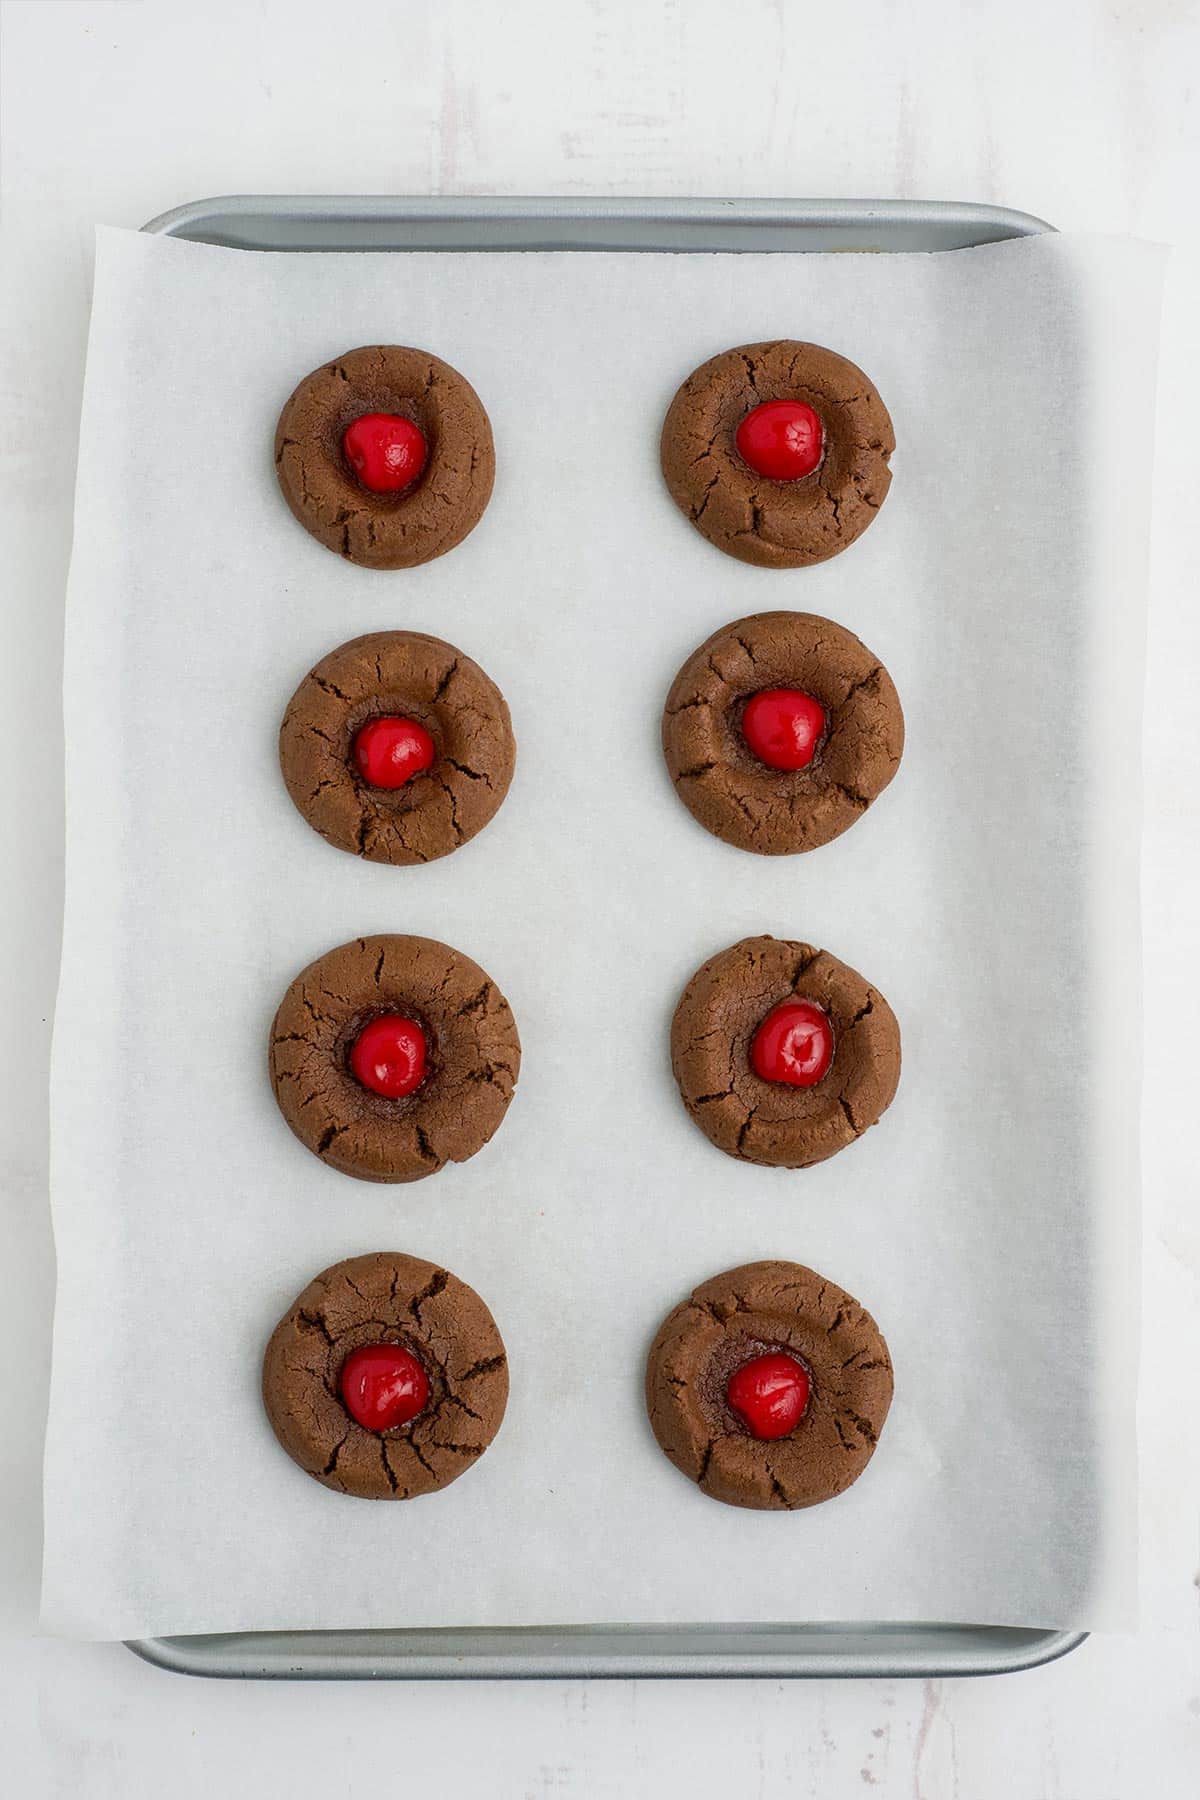 Chocolate cherry cookies on a baking tray after cooking.